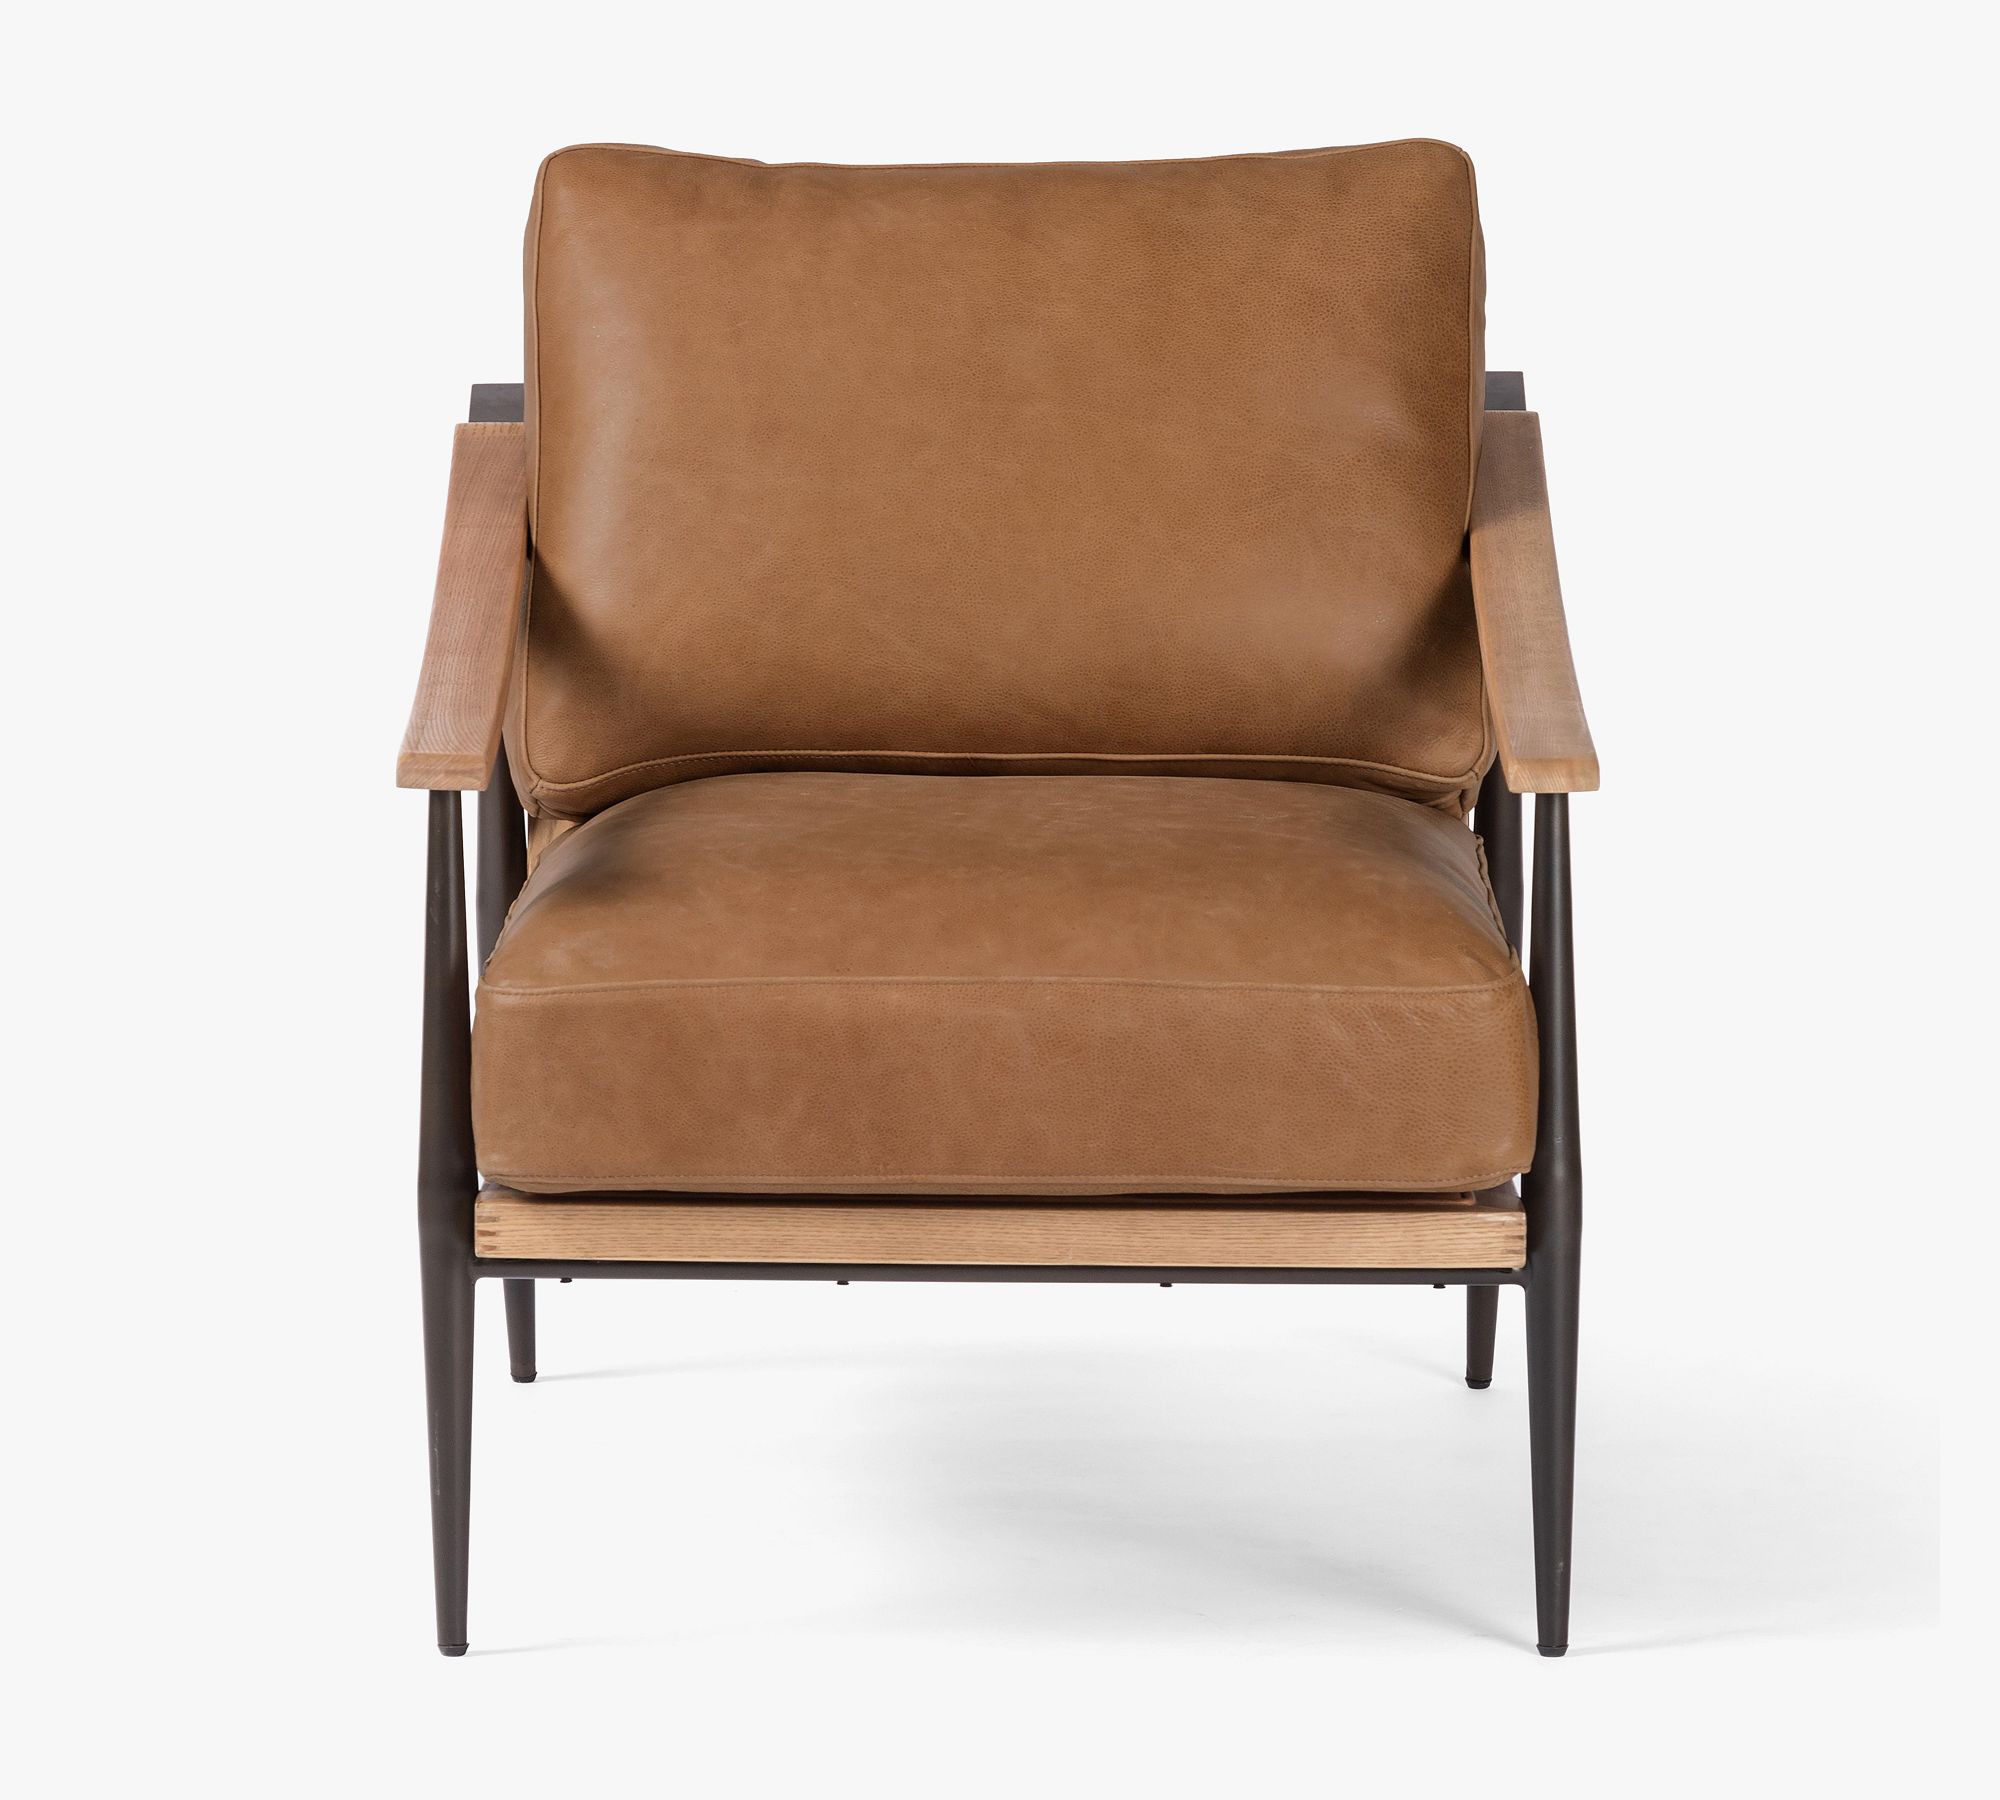 Lakeport Leather Chair